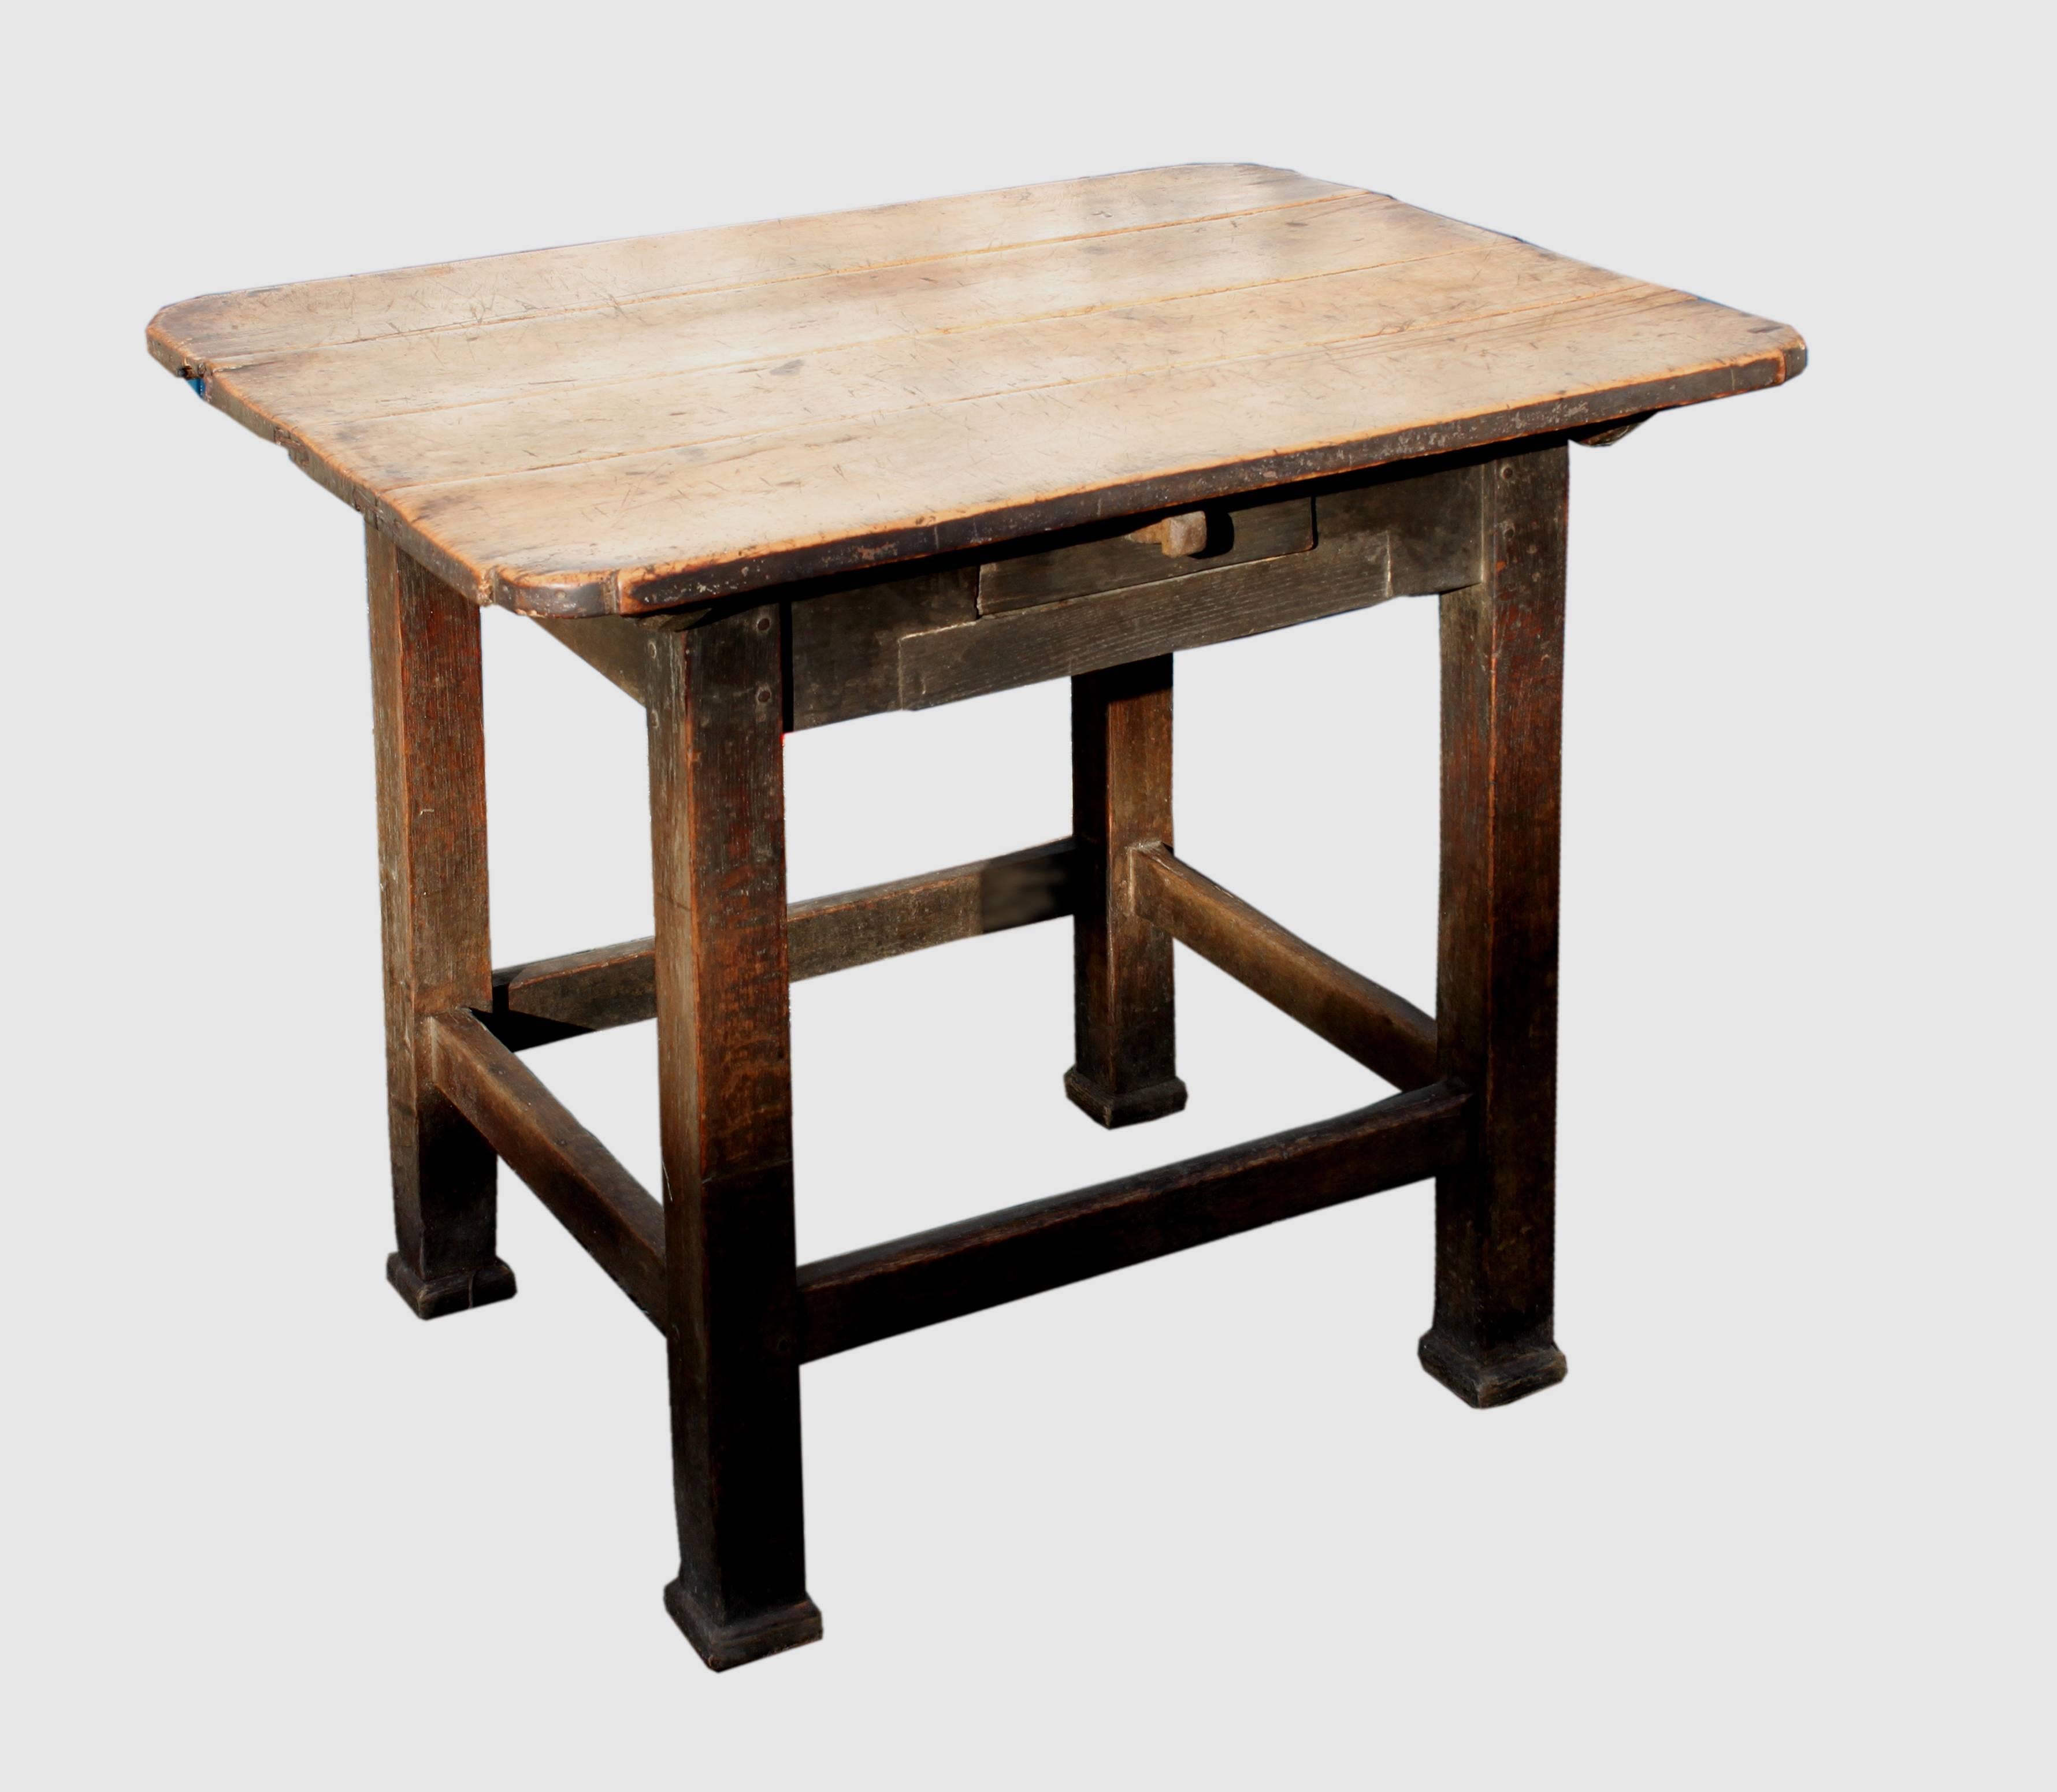 A Primitive early 19th century centre table with drawer; the top in fruitwood with quirk corners united to the oak base with sledge bearers, the base with peg construction, largely untouched condition.

 